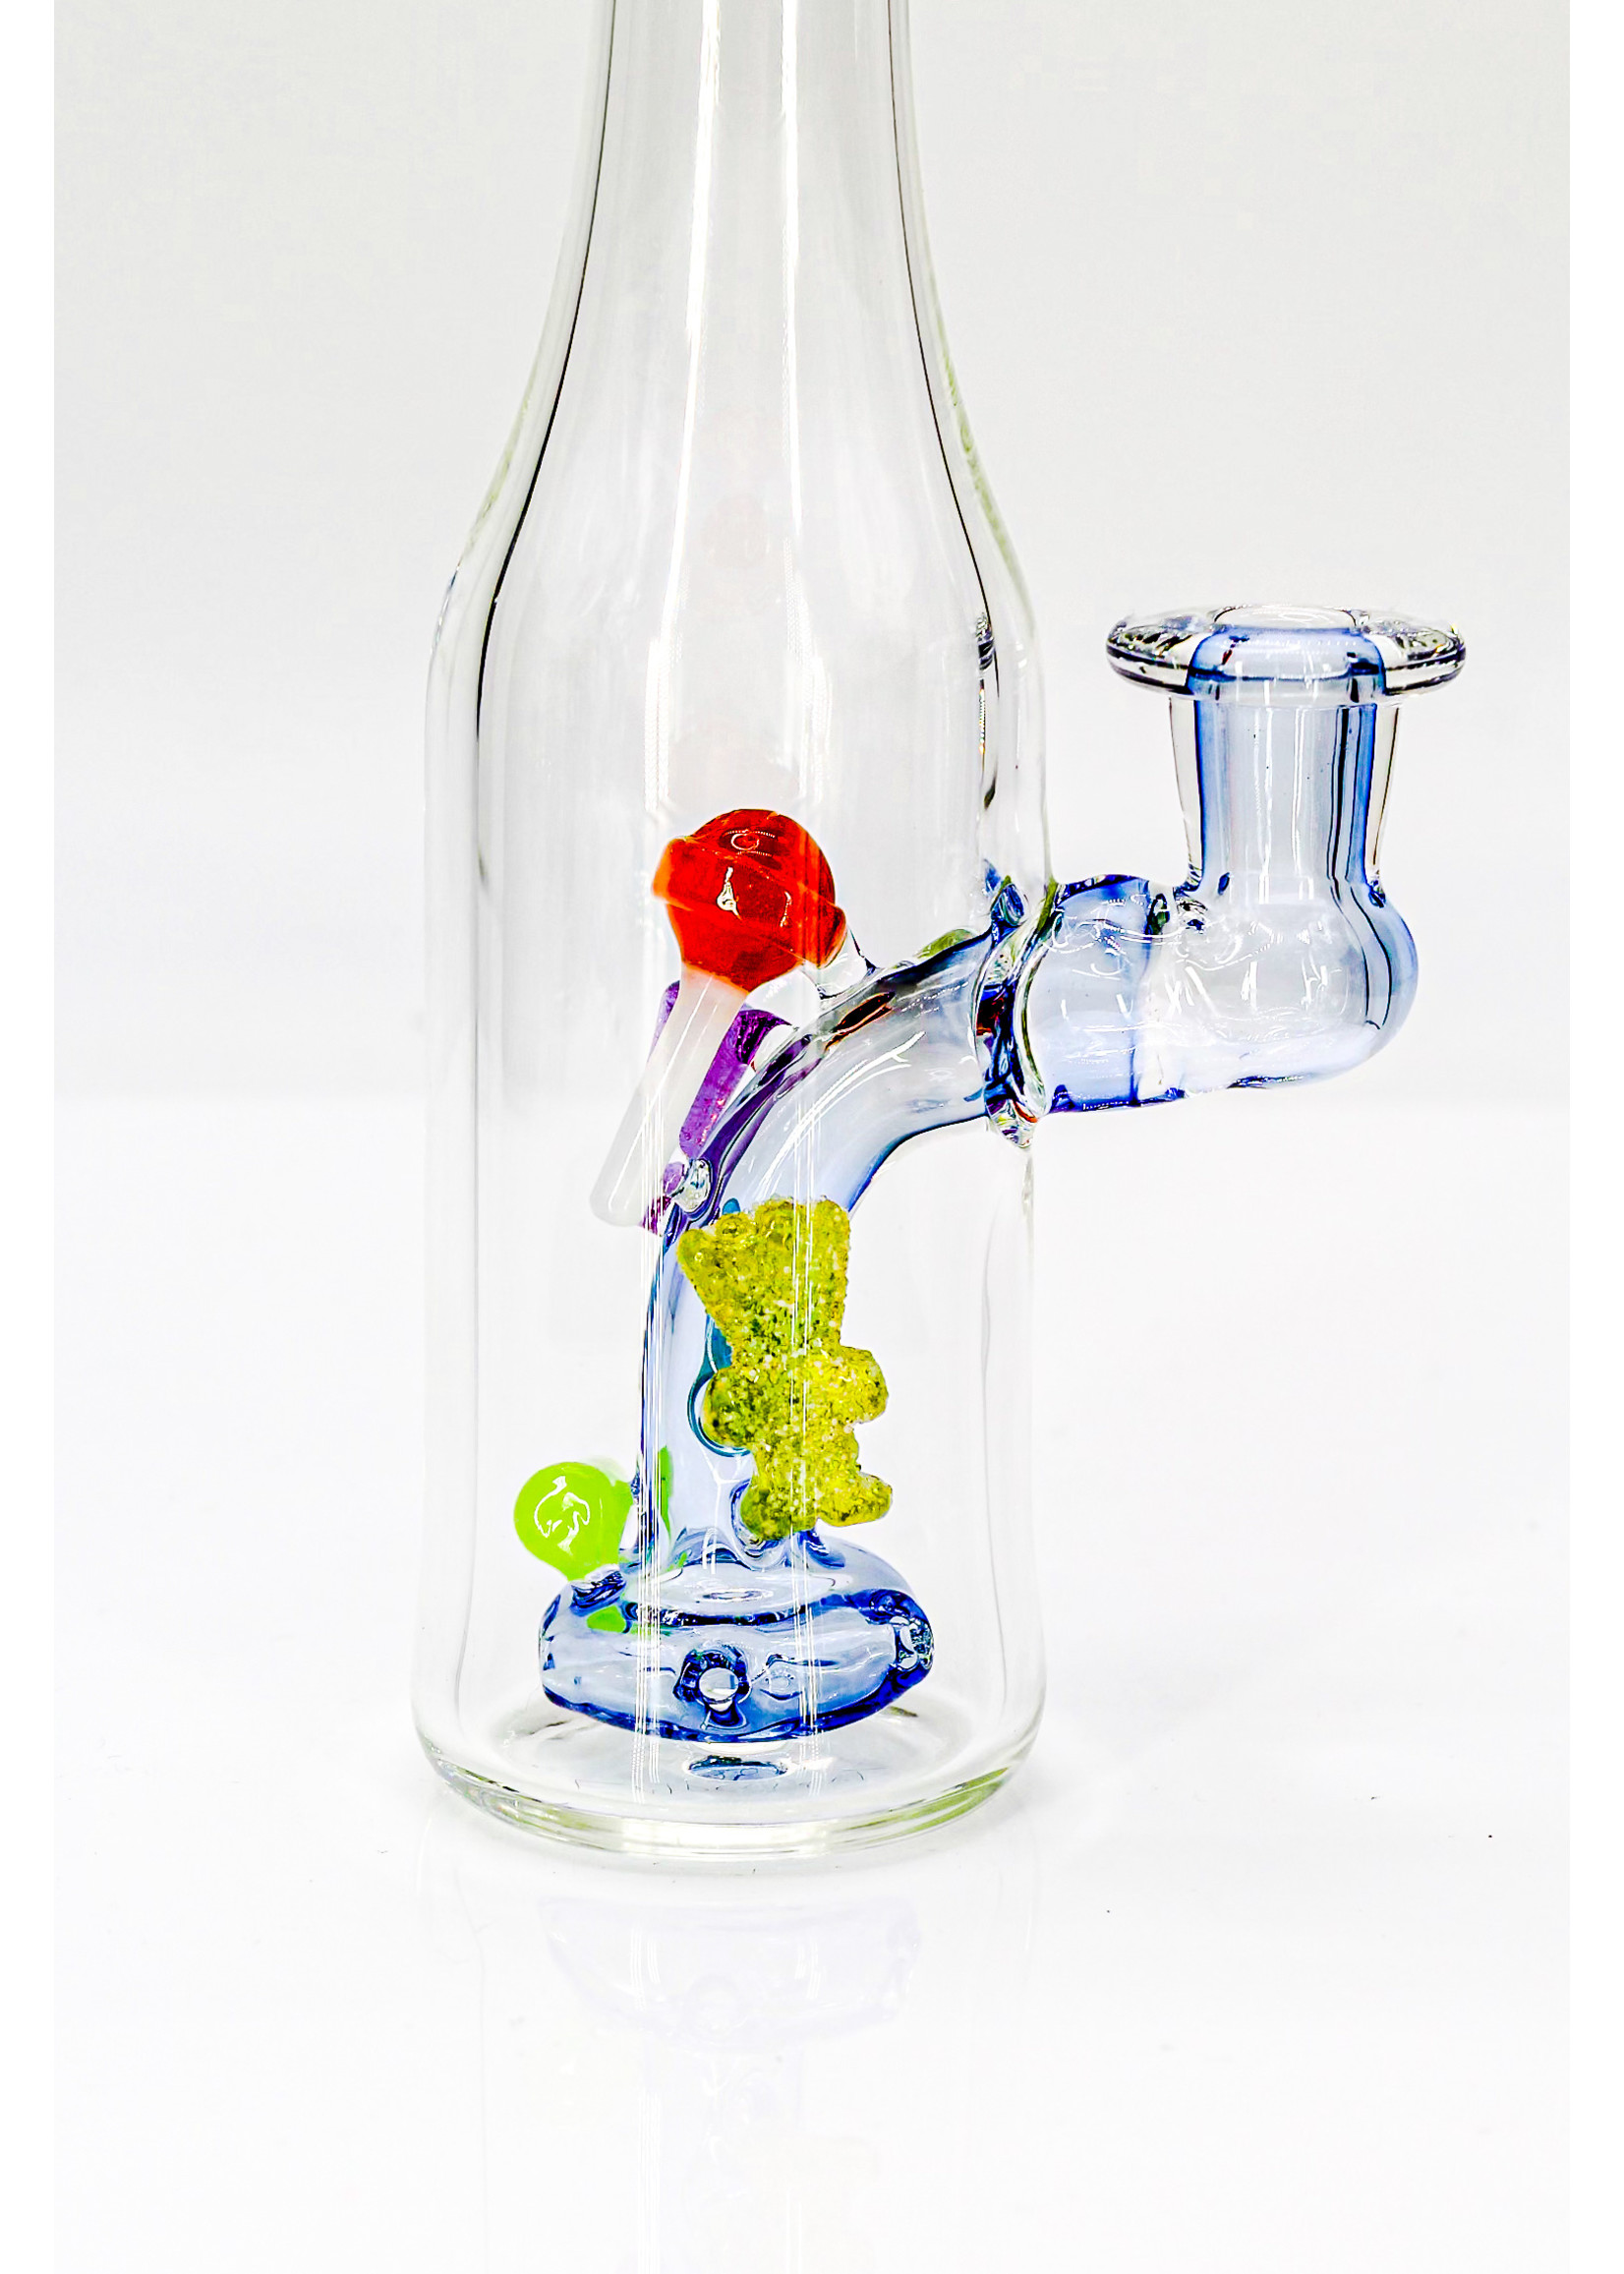 Emperial Glass Emperial Glass Bottle Rig #3 2022